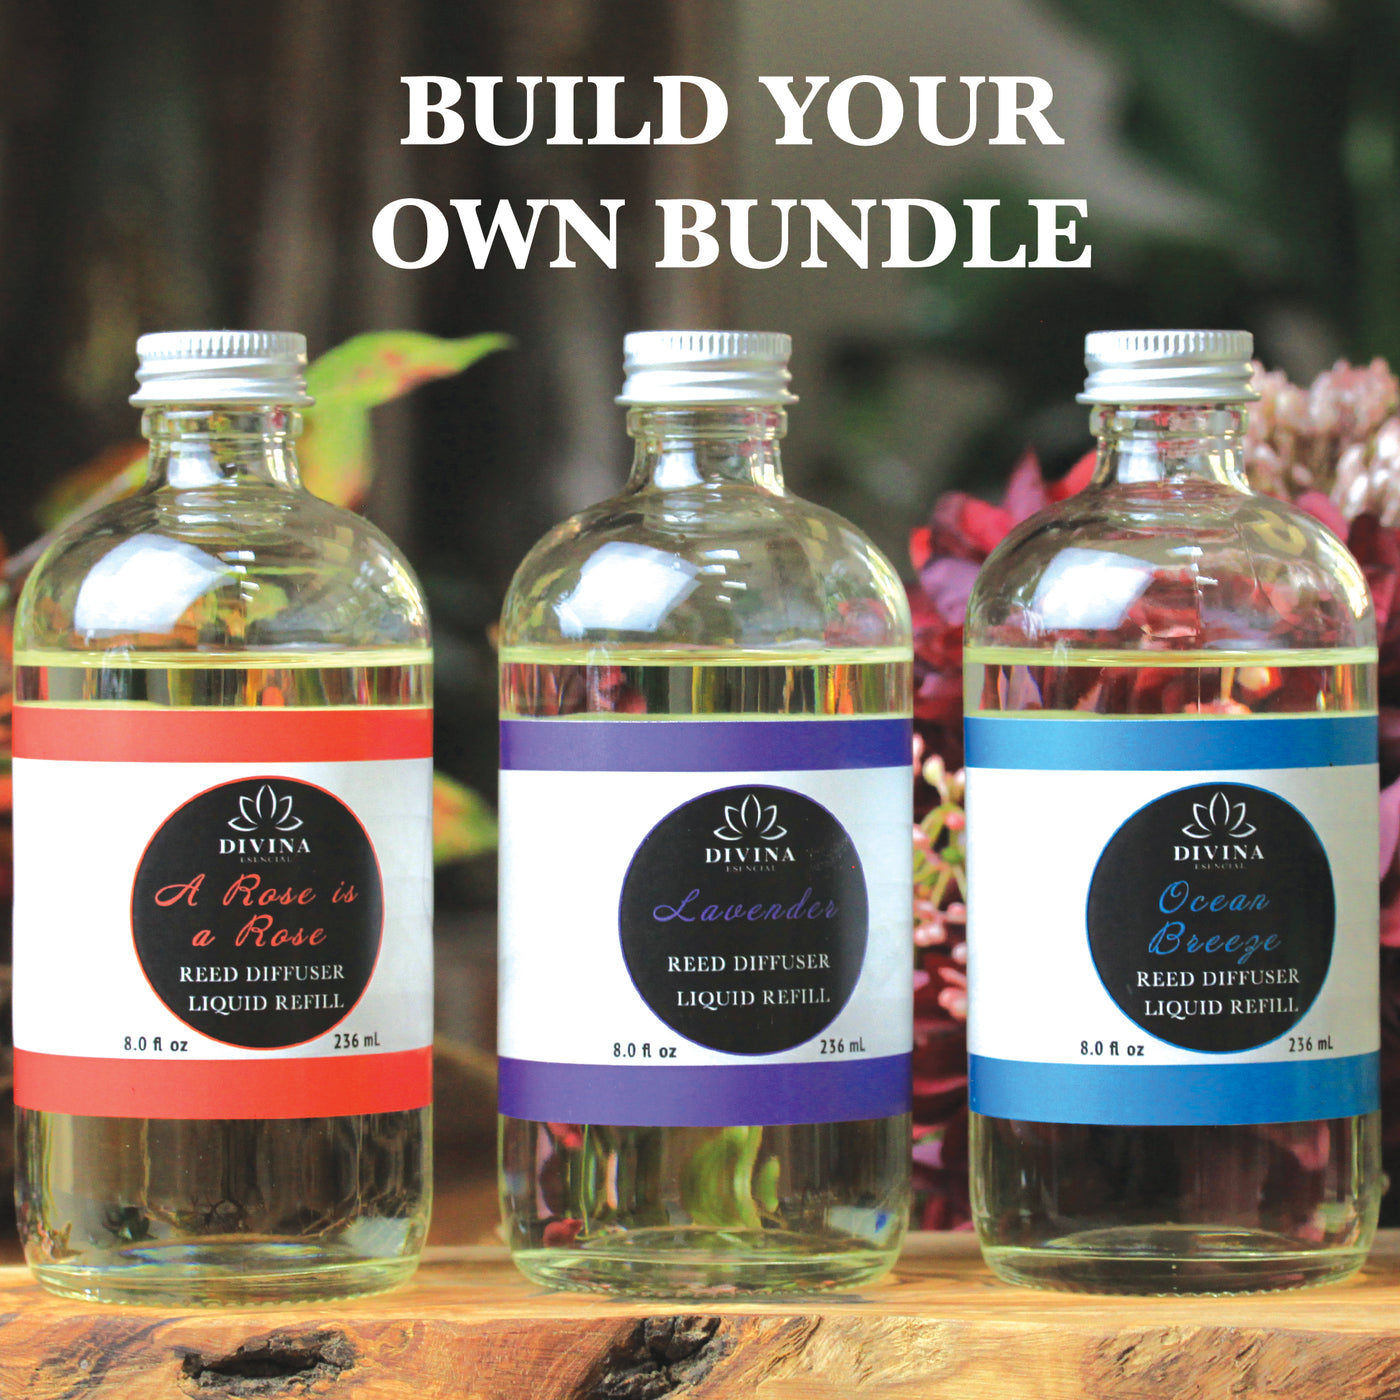 Build your Own Bundle Buy Two, Get One Free